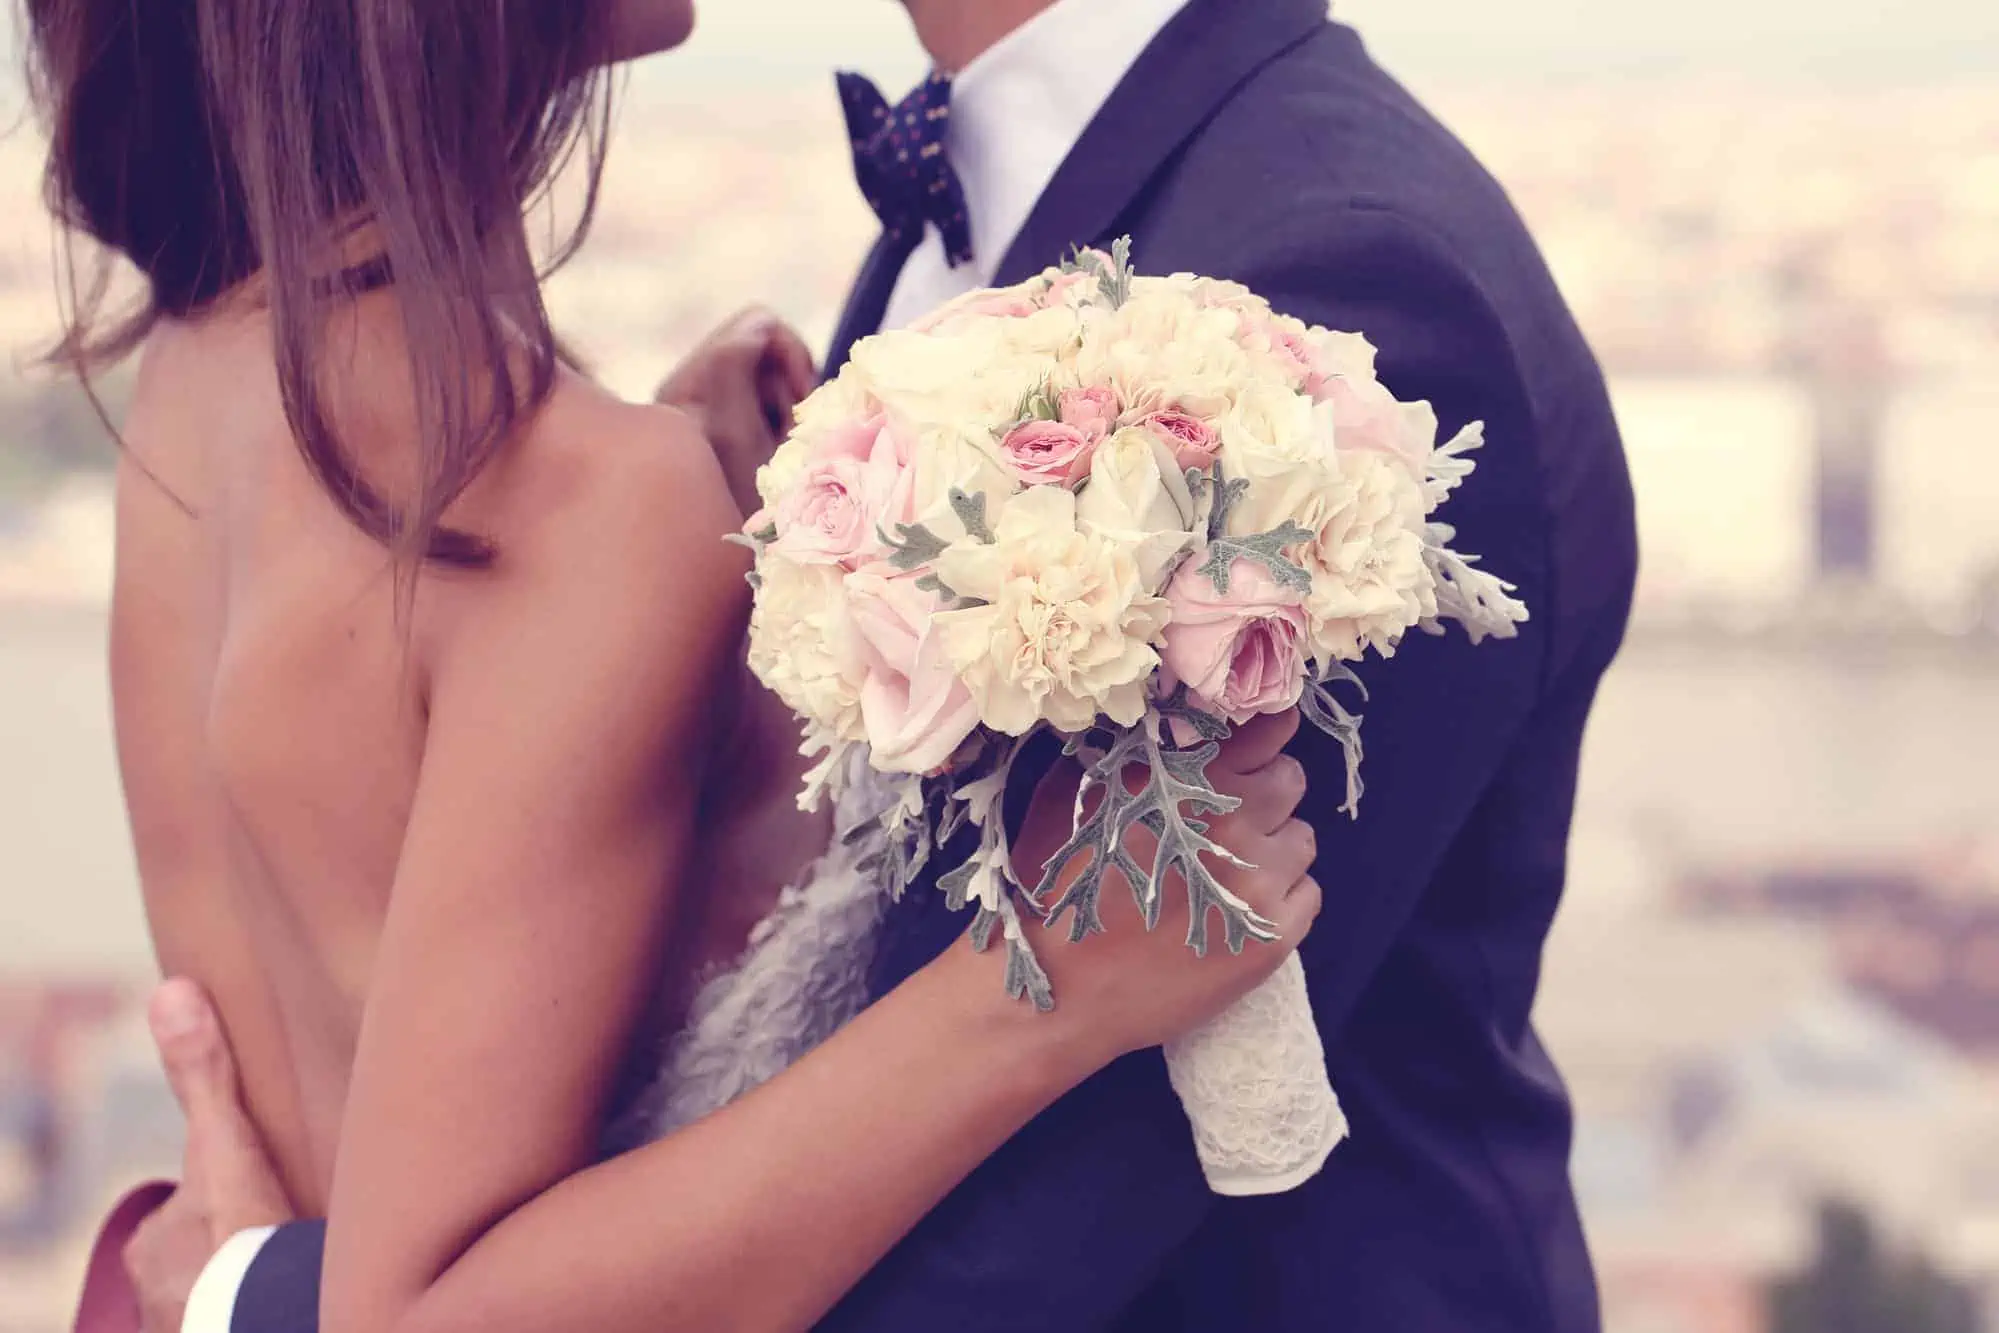 A man and a woman holding a bouquet of flowers